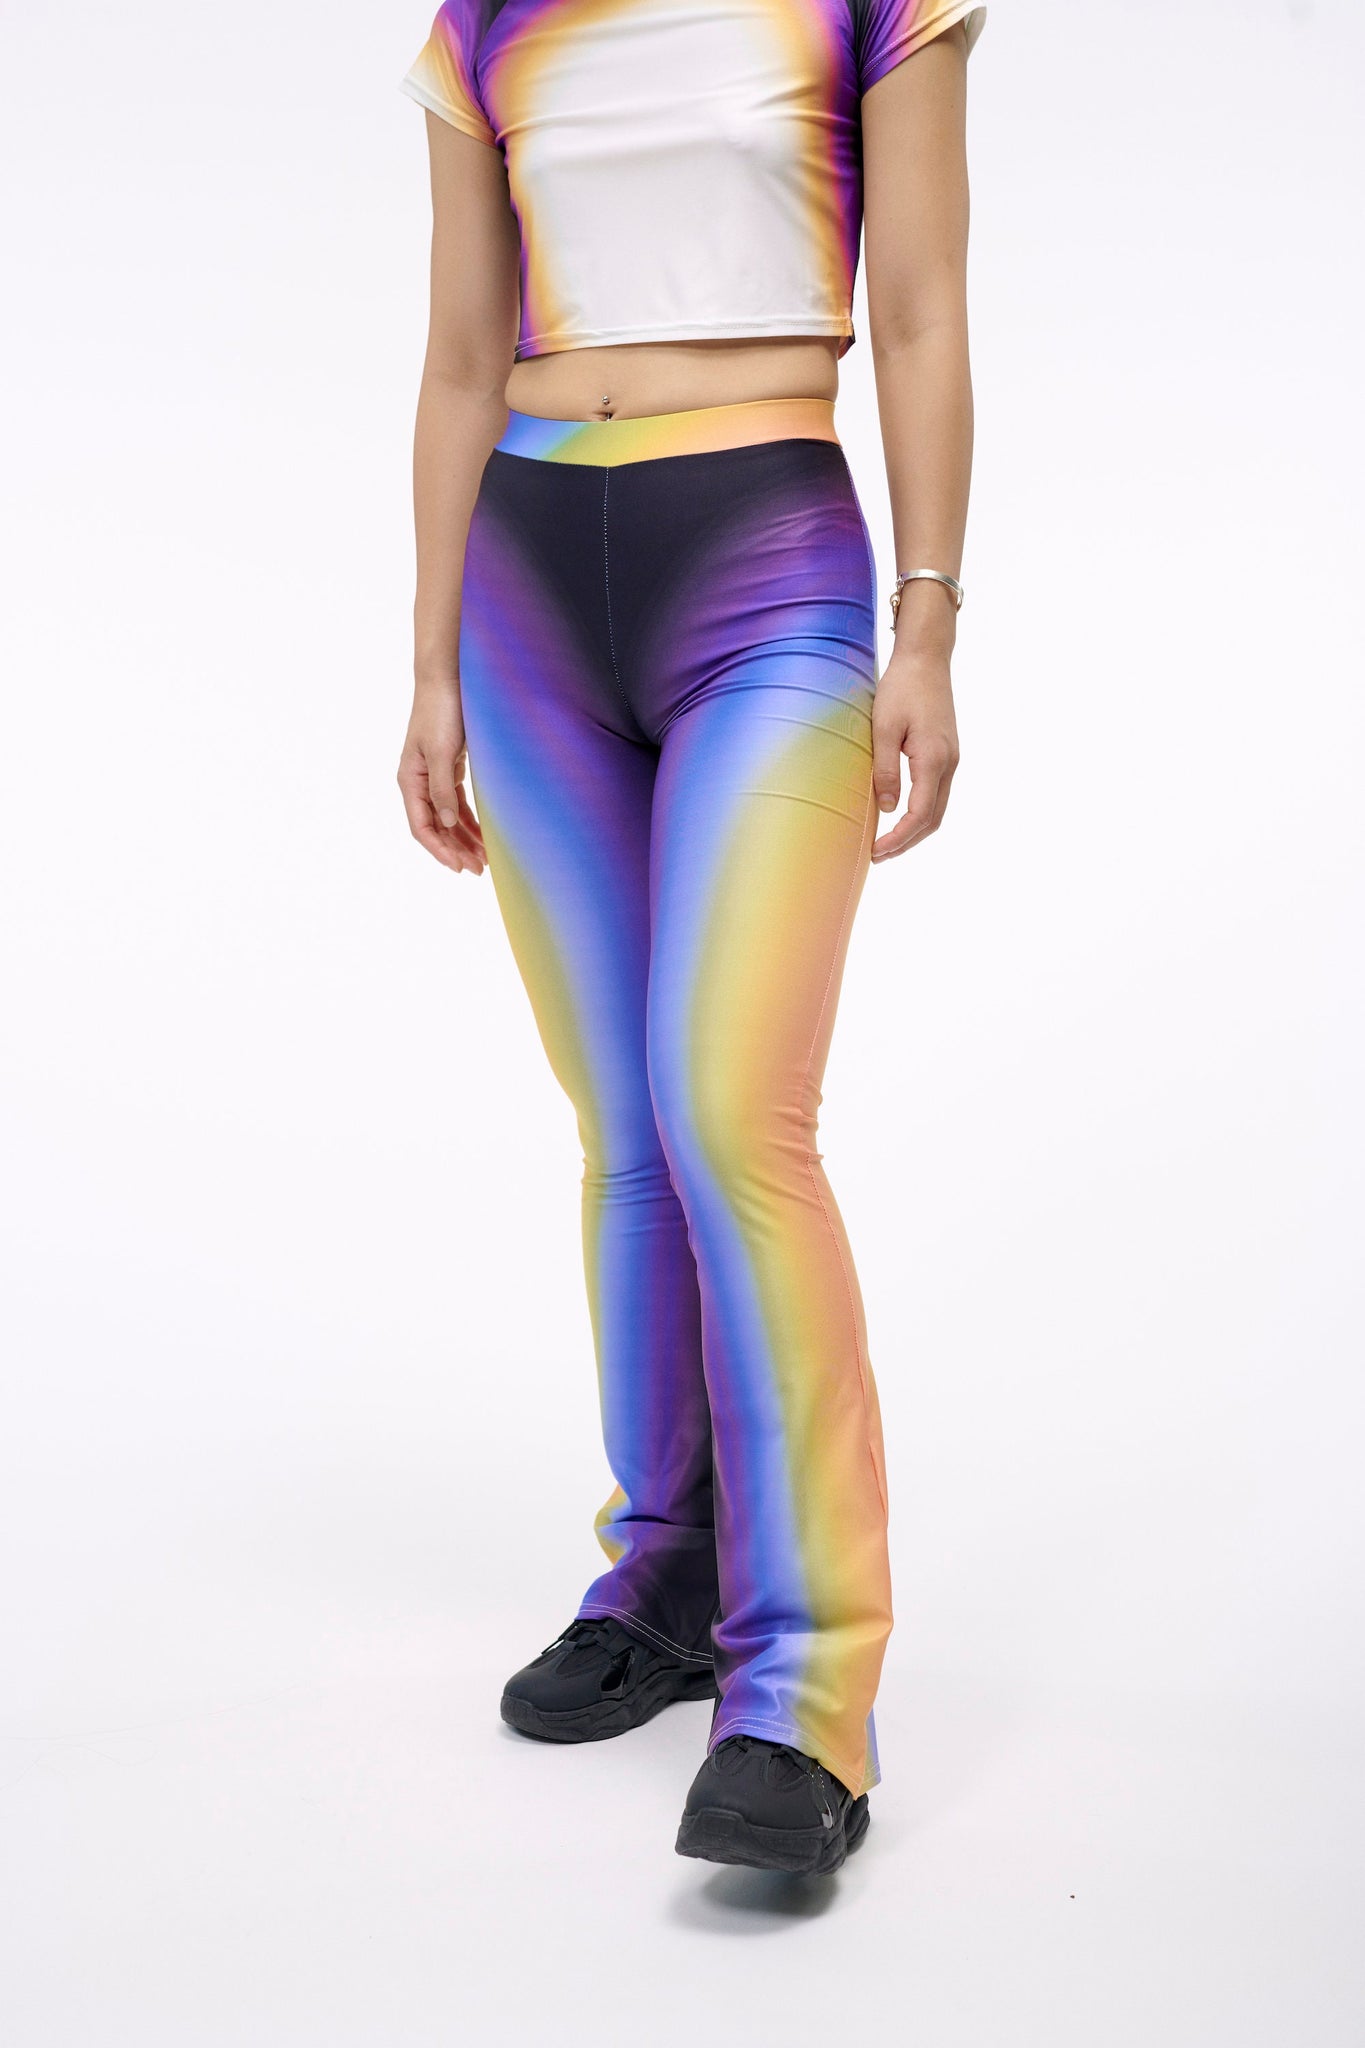 The Blazing Heat Glow Pant | A Black Rainbow Piece for the Galactic | Flared Legging with a High Contrast Gradient Print | Goose Taffy